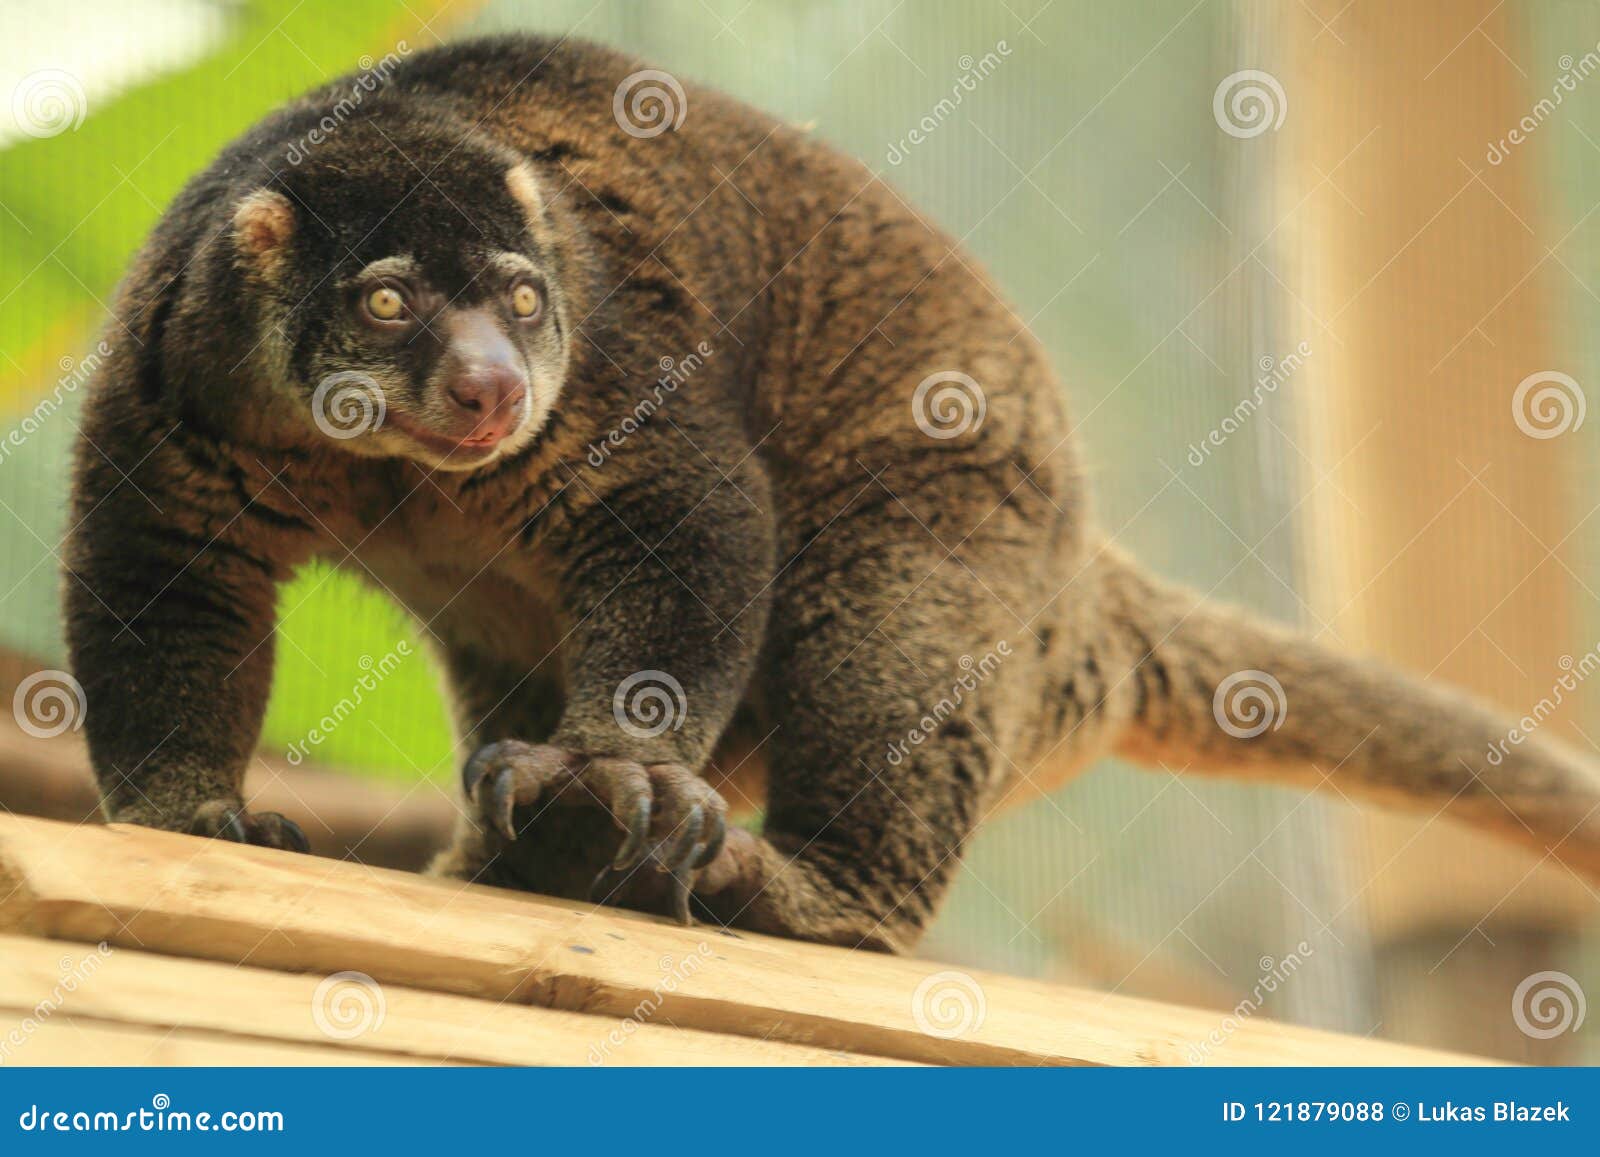 2 847 Cuscus Photos Free Royalty Free Stock Photos From Dreamstime